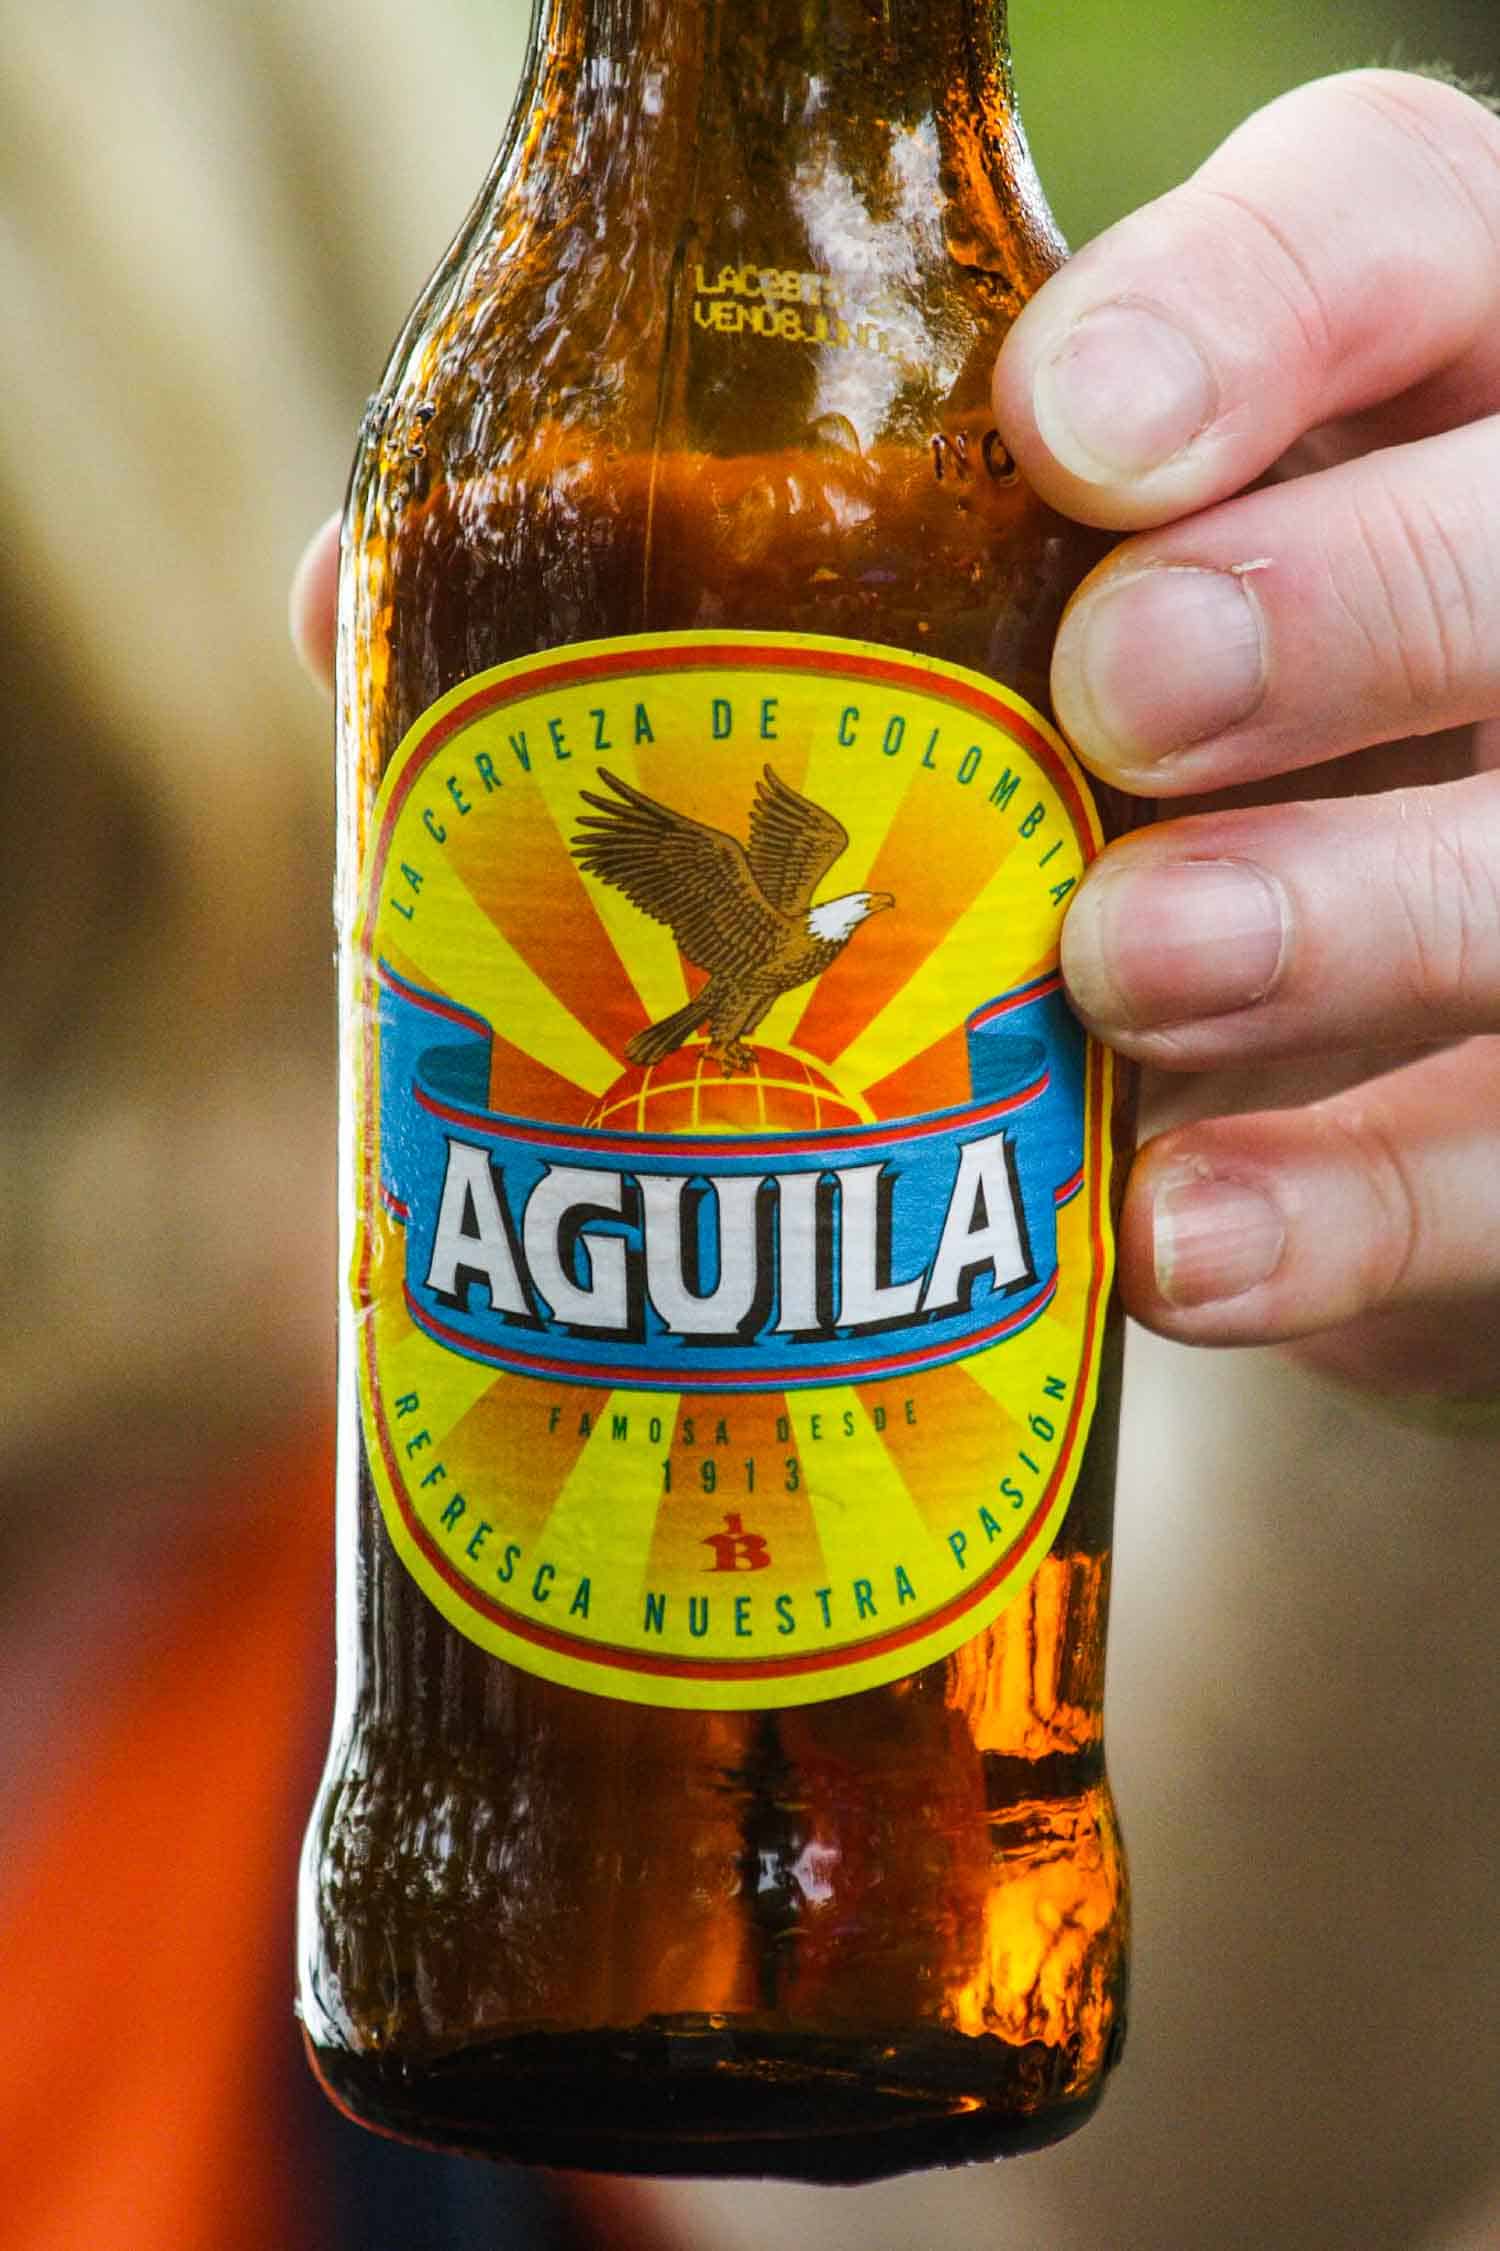 Colombian beer Aguila is one of the most popular drinks in Colombia